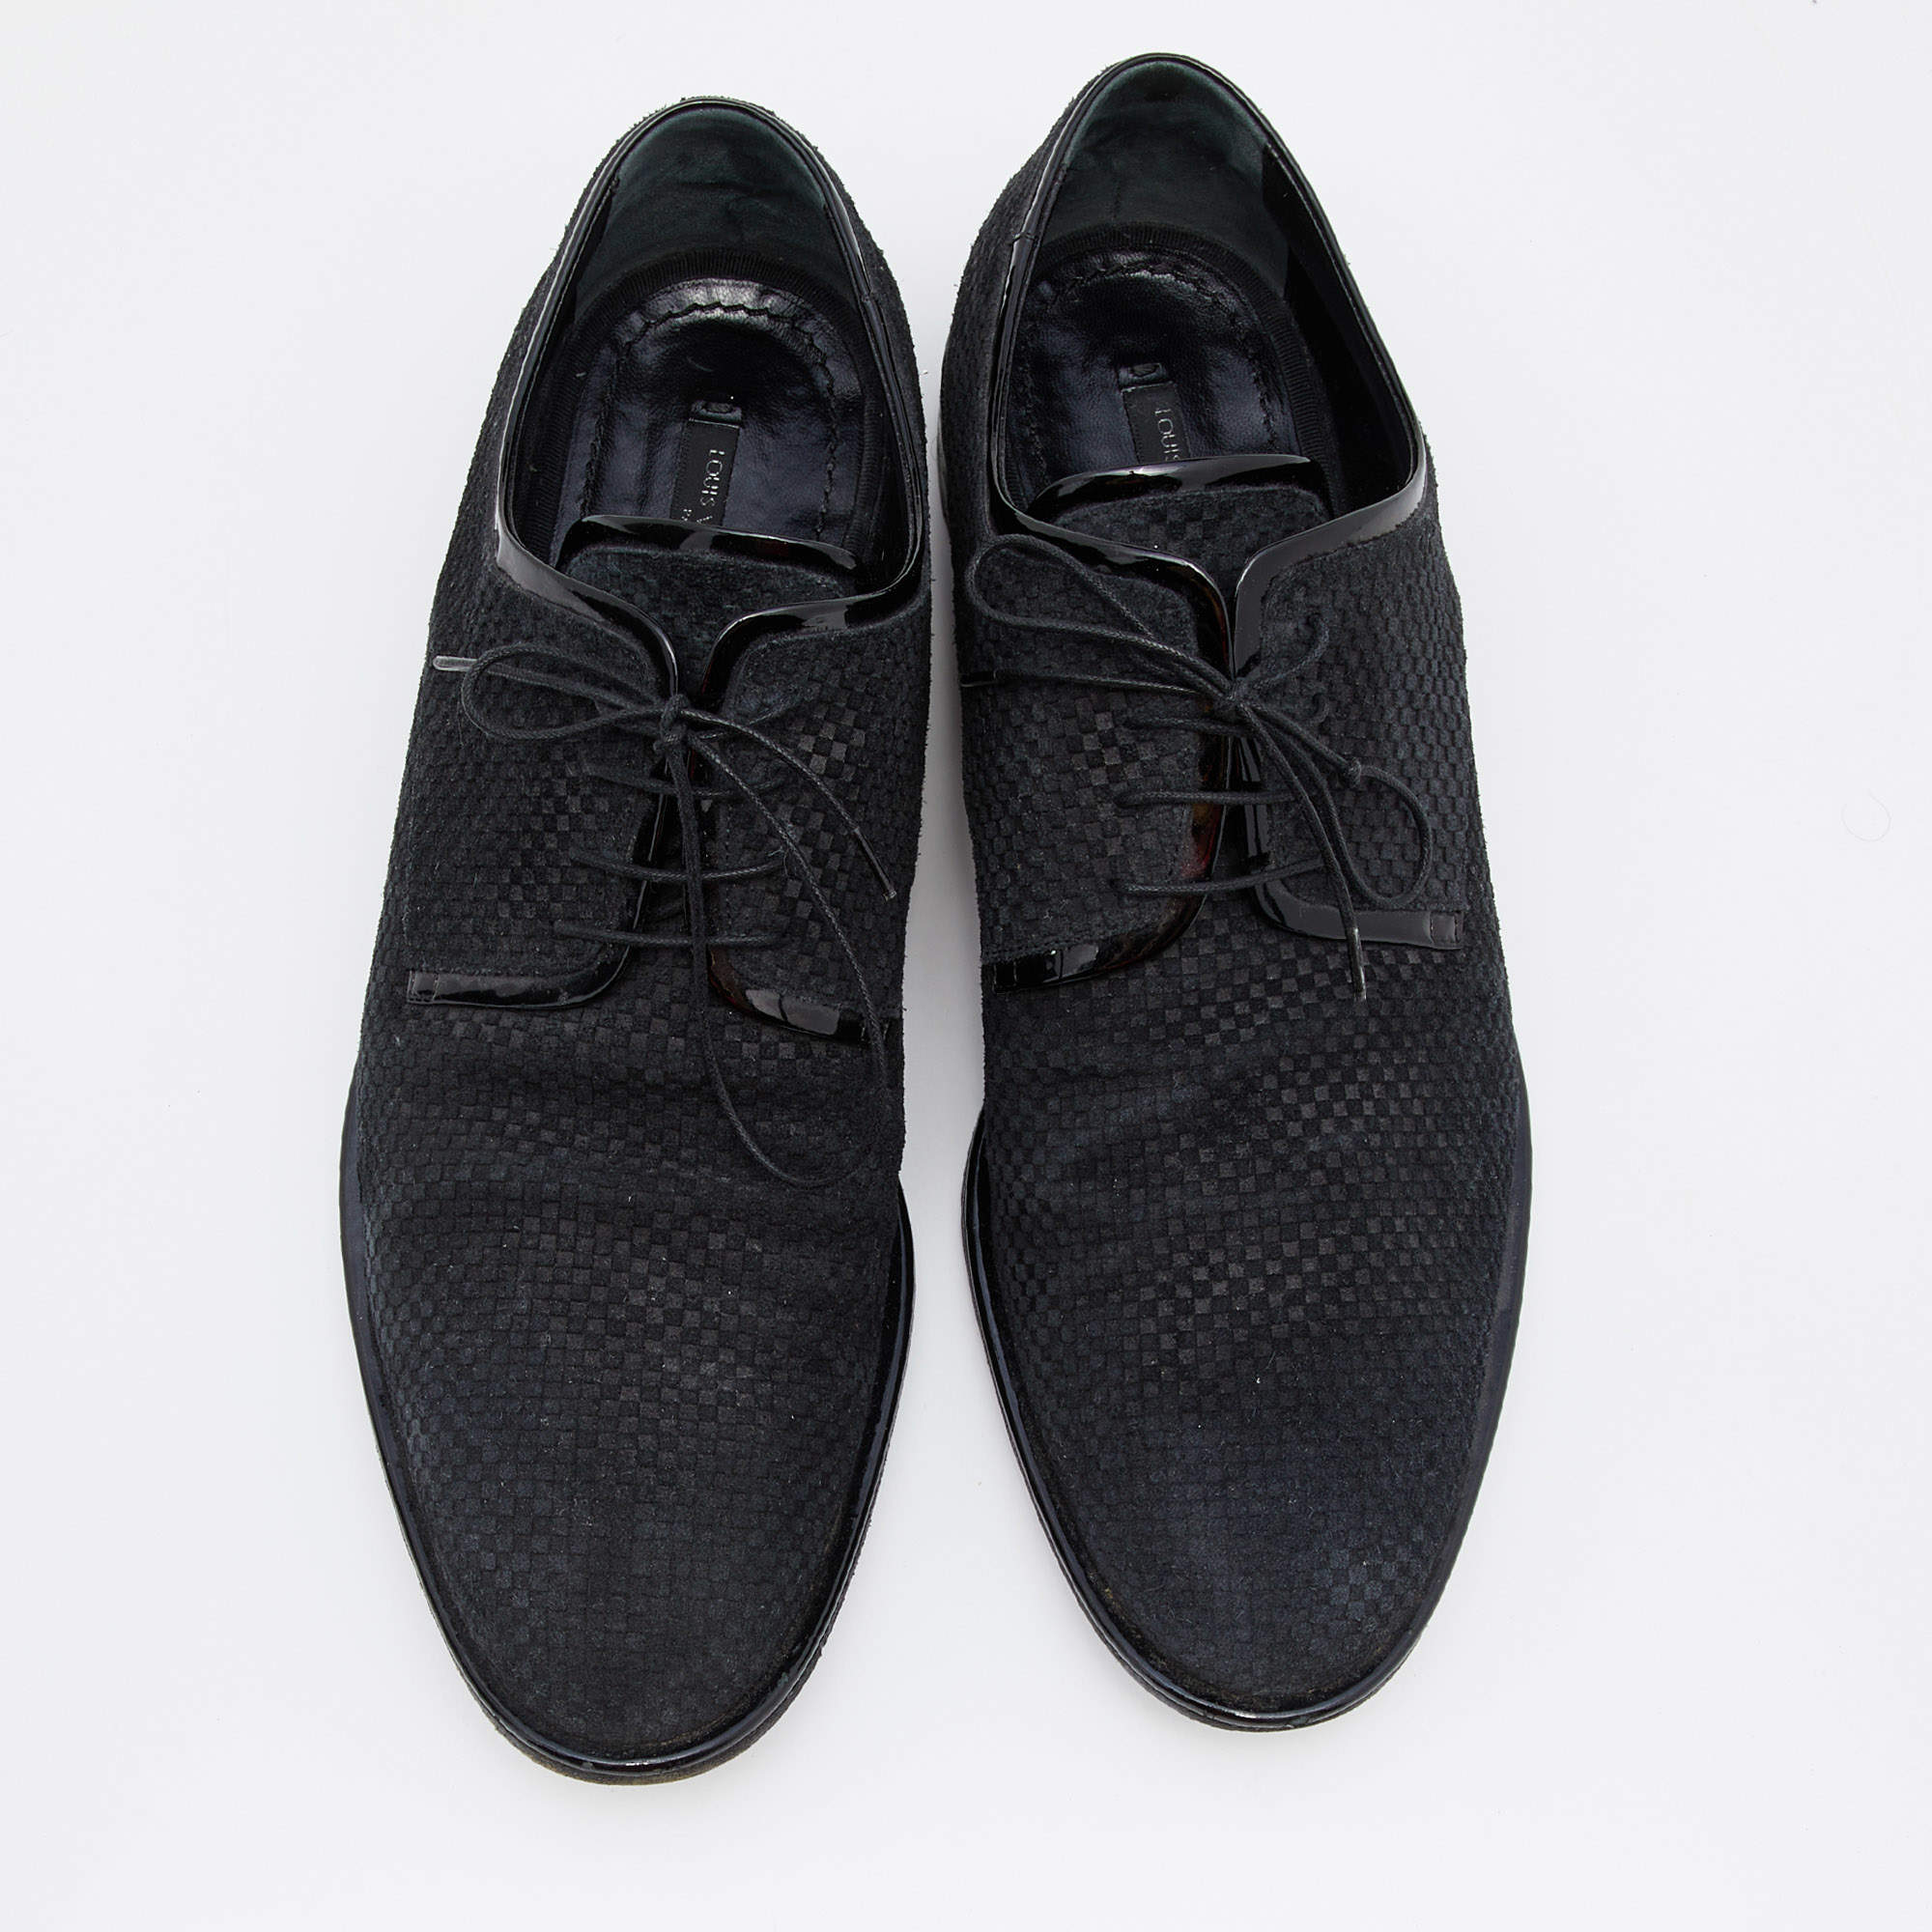 Louis Vuitton Black Damier Embossed Leather Lace-Up Derby Size 43